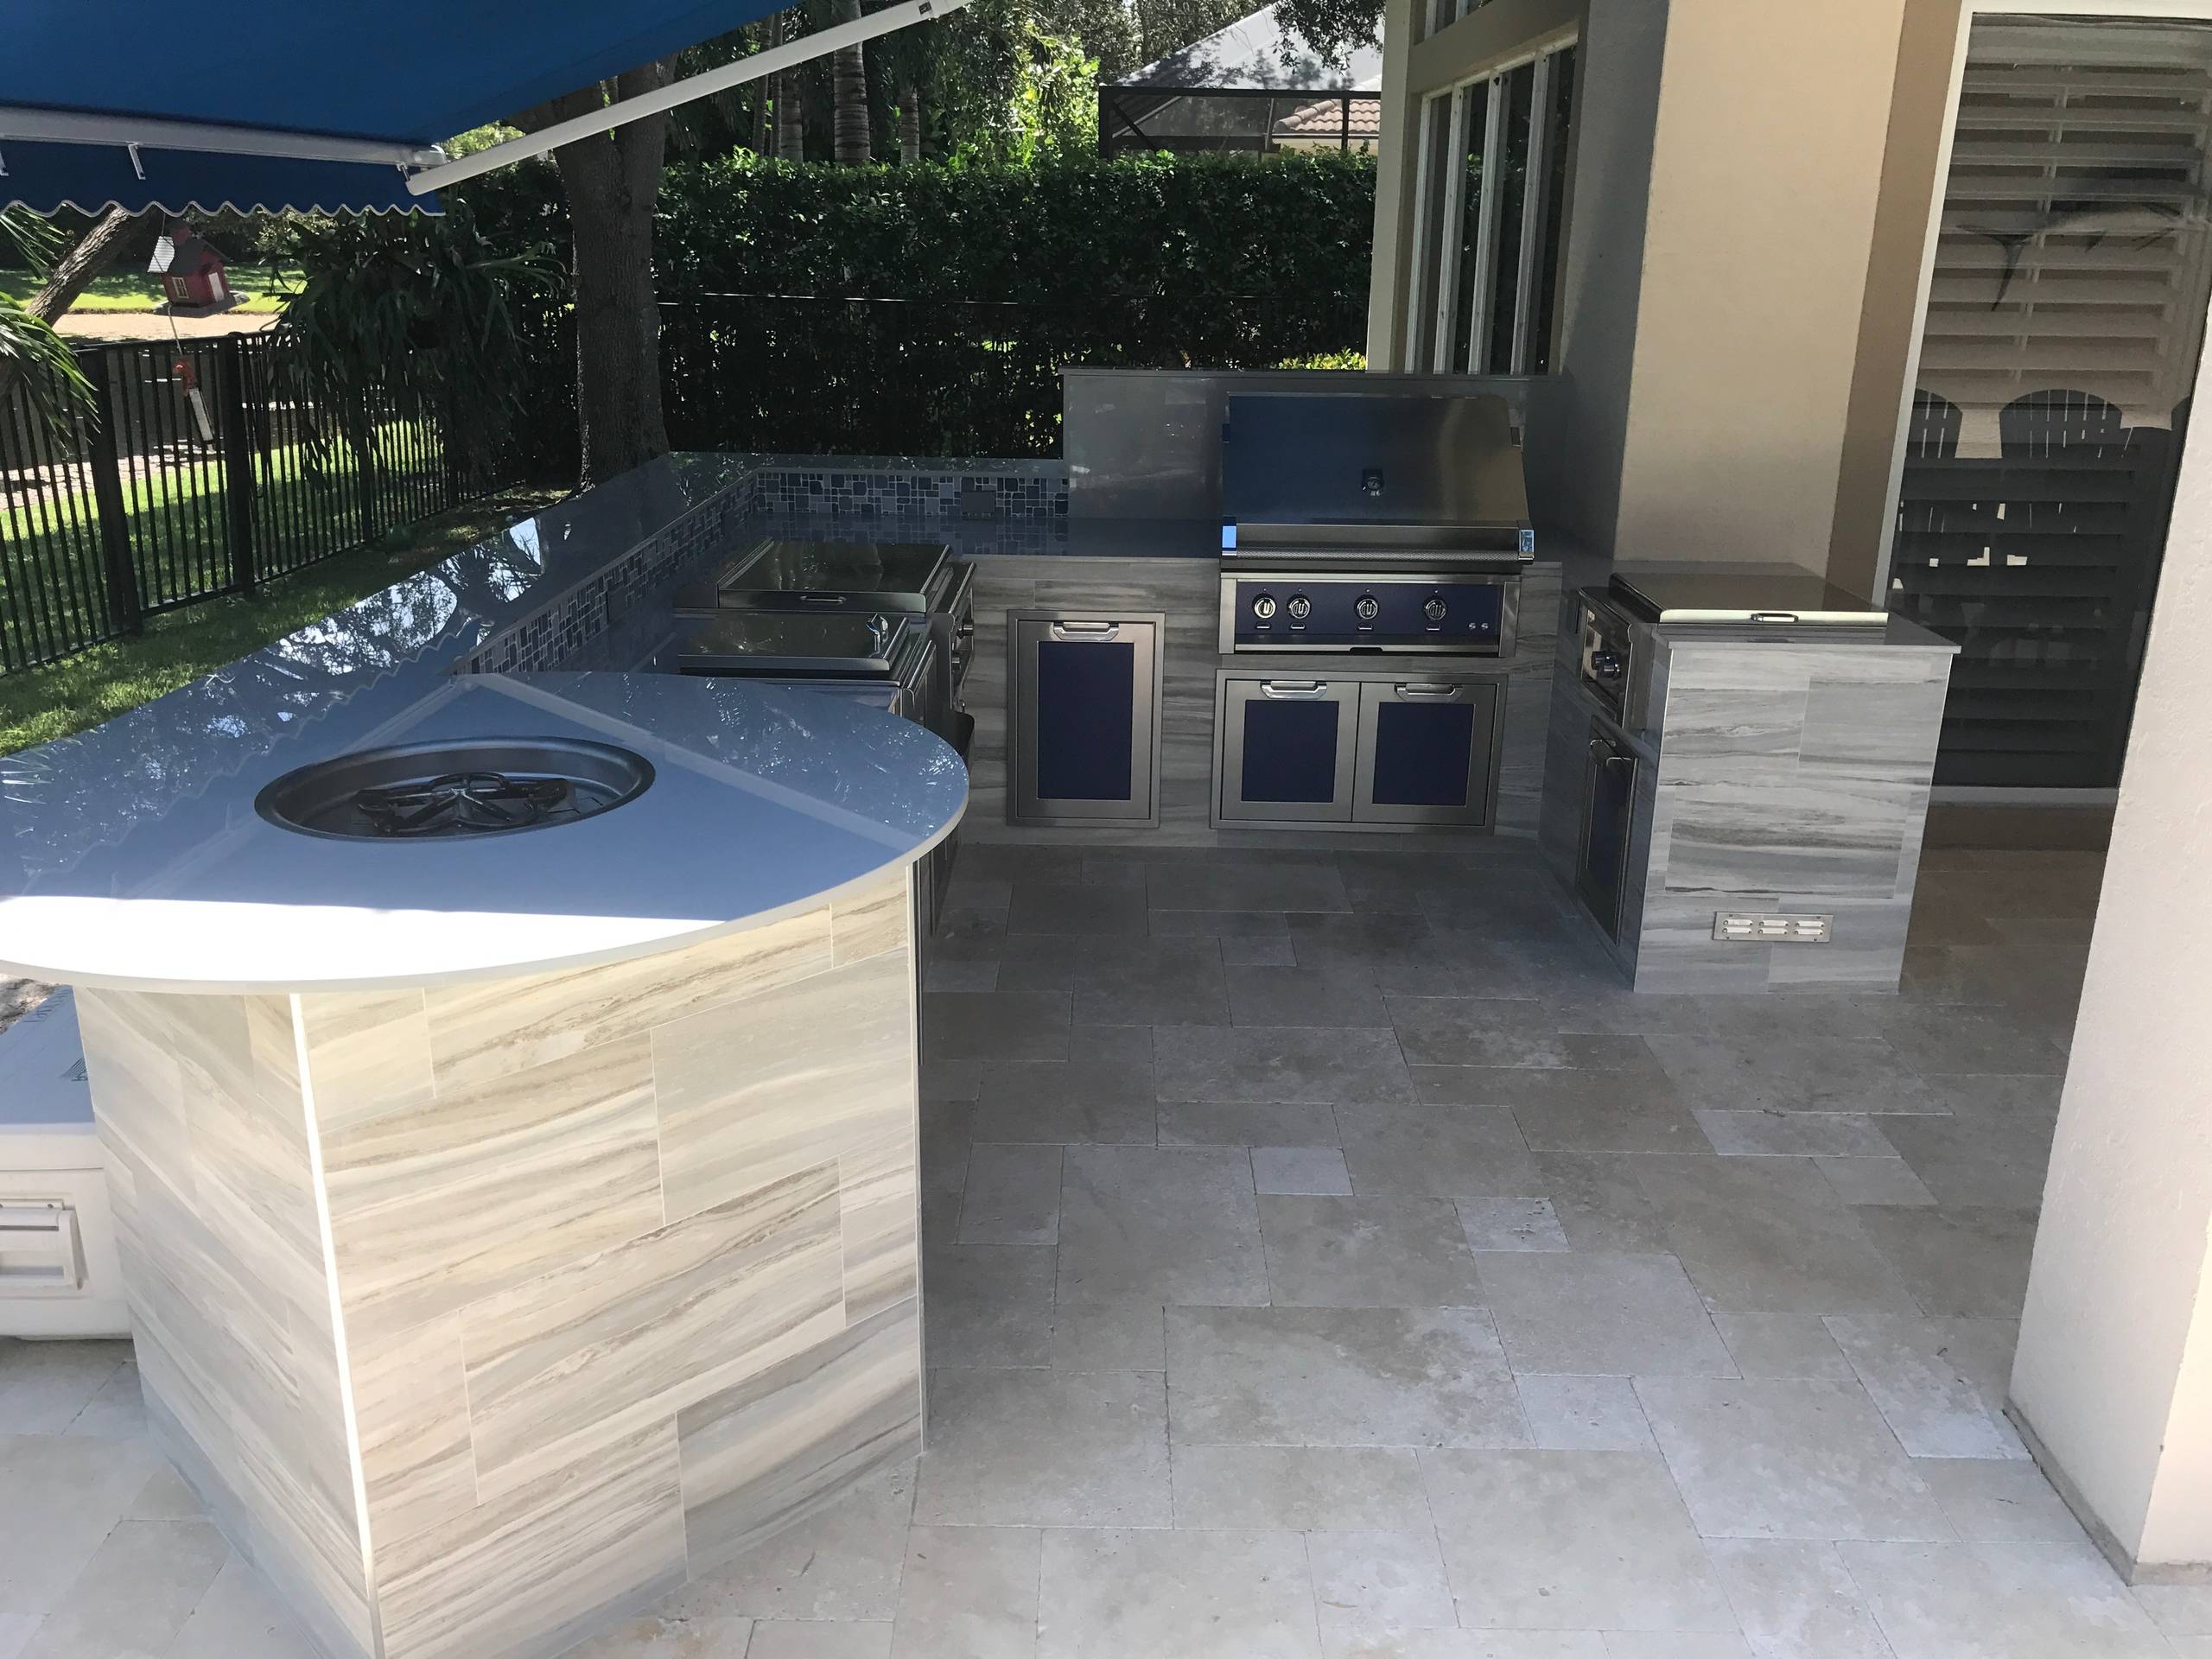 Patio kitchen – tropical backyard stone patio kitchen idea in Miami with an awning